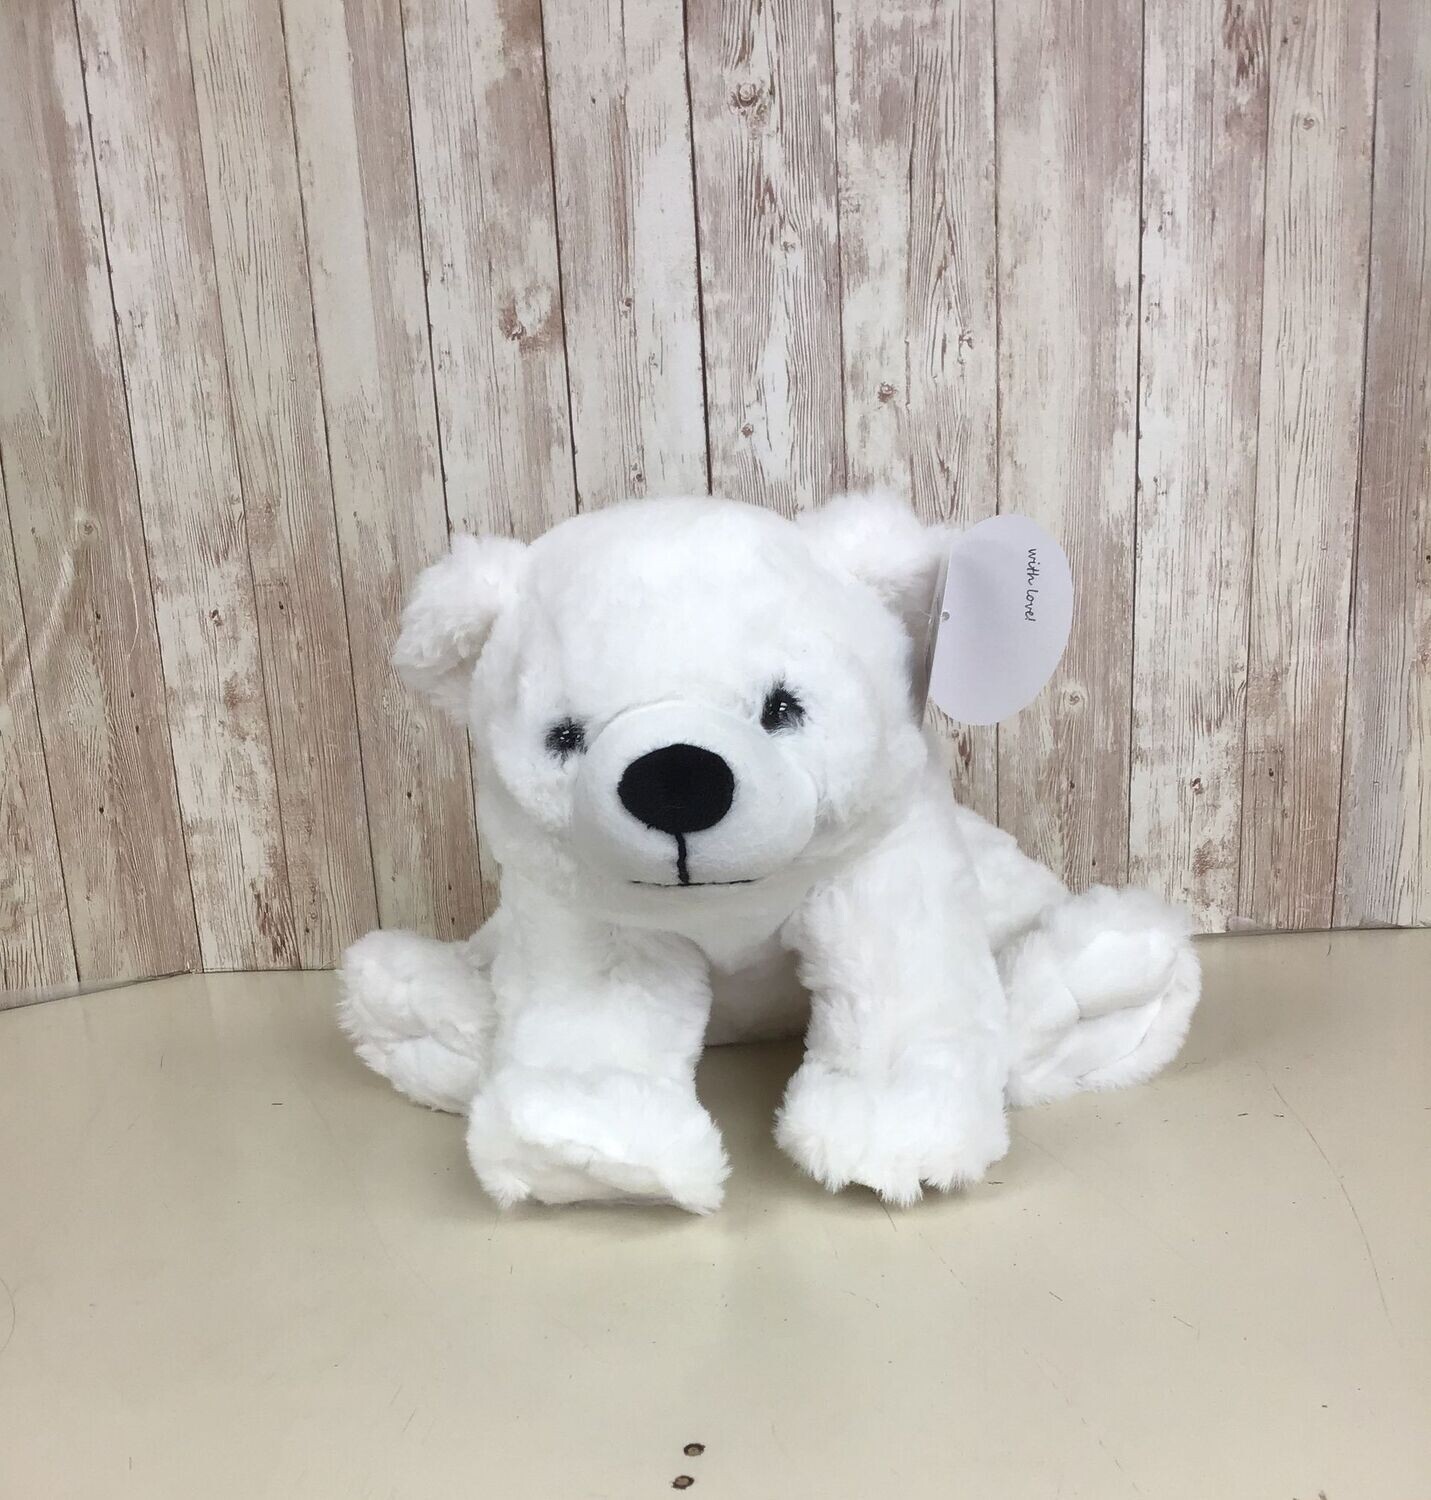 White Polar Bear **SOLD AS ADD-ON ONLY, NOT BY ITSELF**